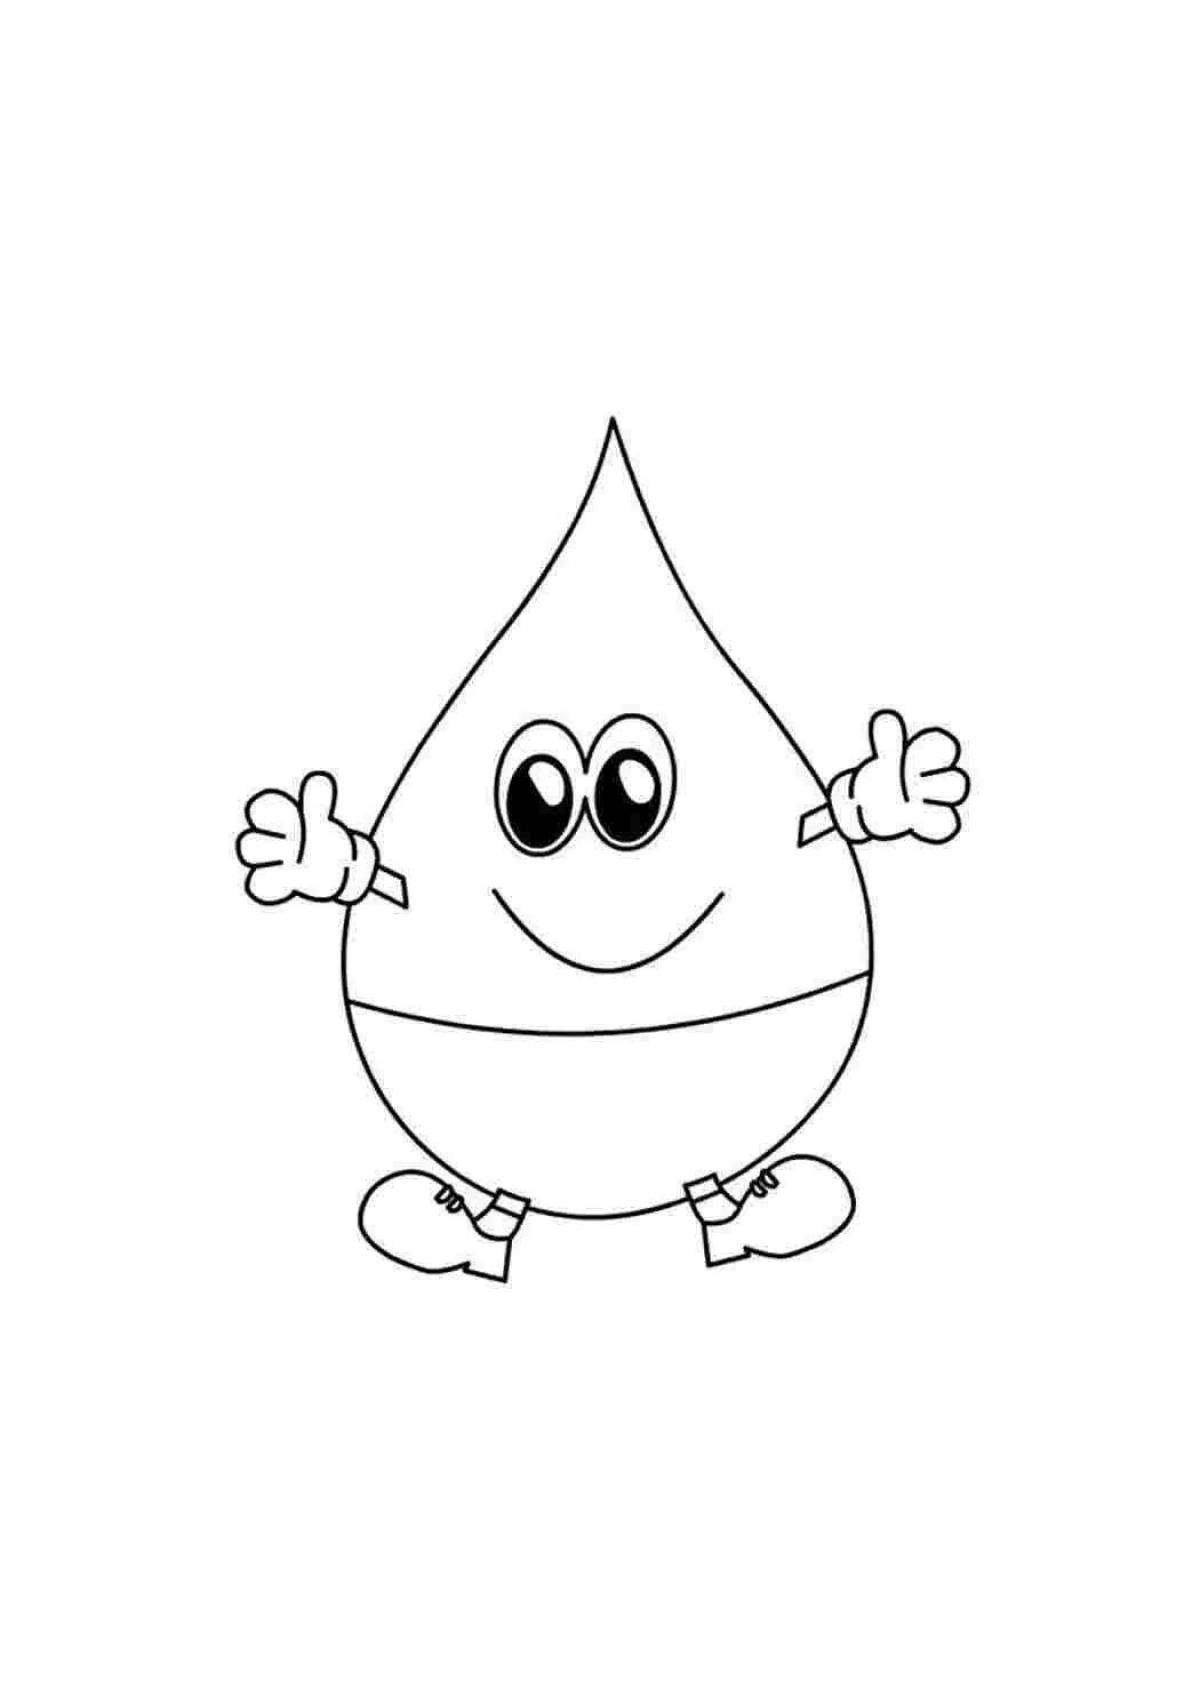 Refreshing water drop coloring page for kids